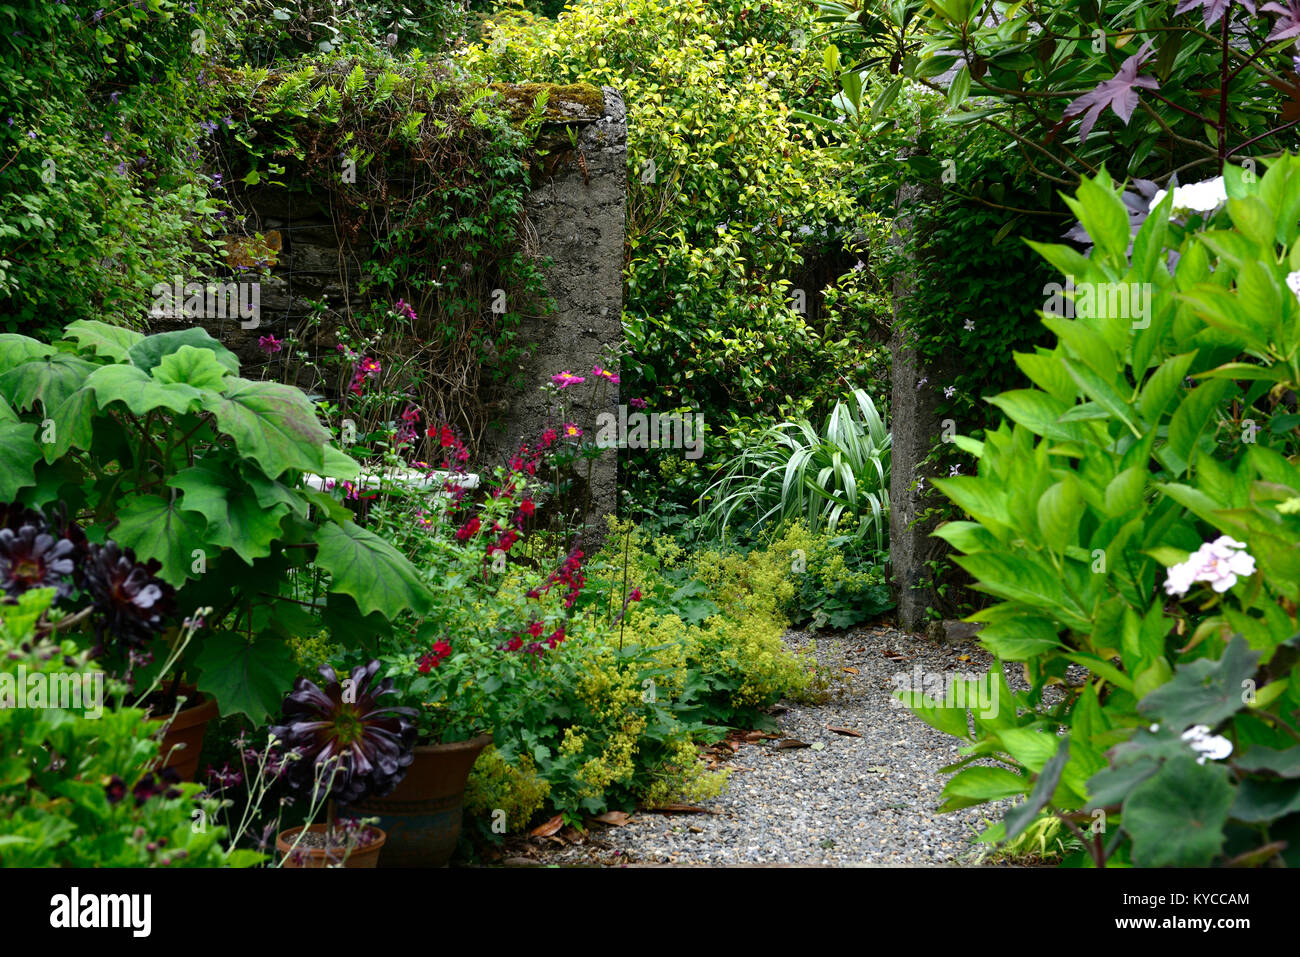 patio,entrance,pots,containers,roldana,salvia,anemone japonica,Astelia chathamica silver spear,mix,mixed,secluded,lush,summer,garden,gardening, Stock Photo